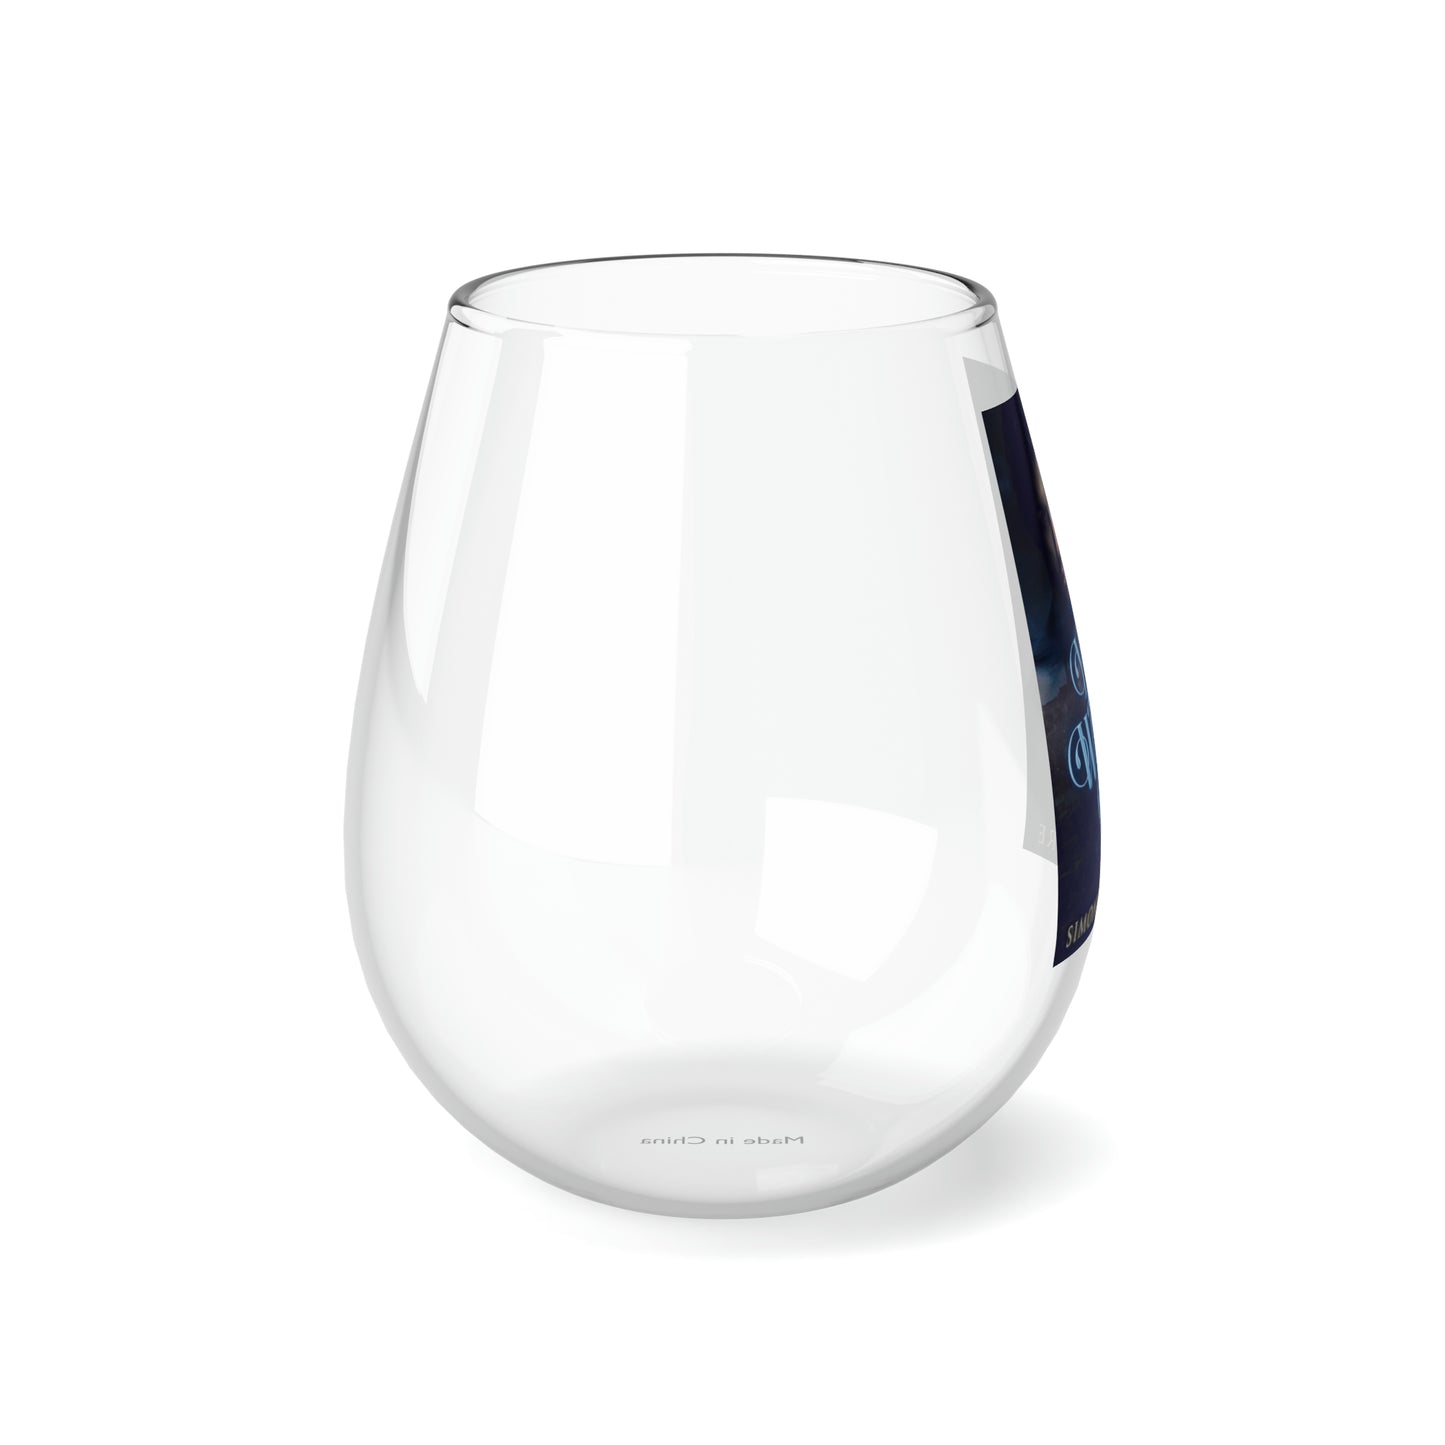 You Within Me - Stemless Wine Glass, 11.75oz